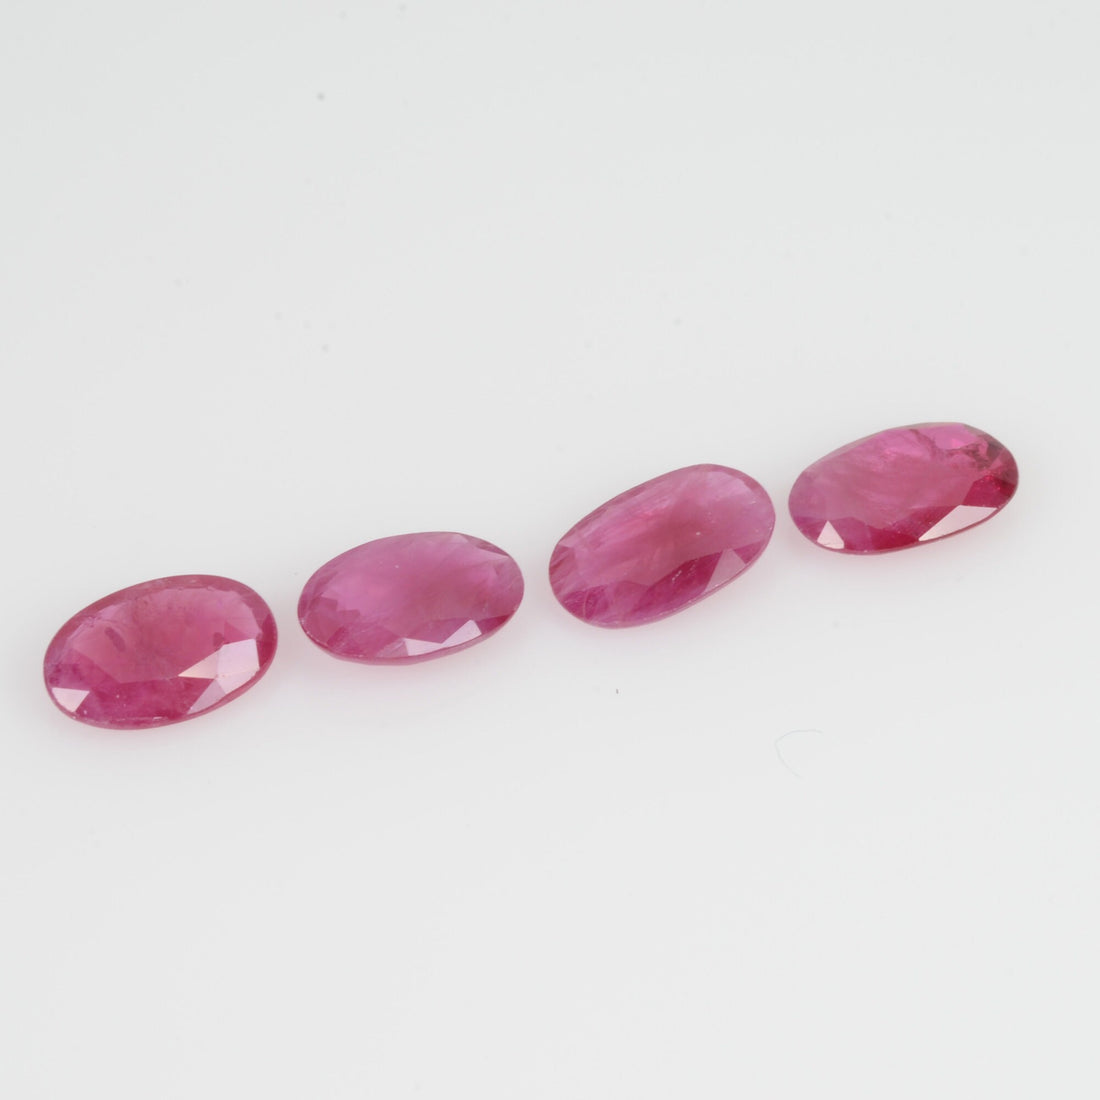 6x4 MM Natural Ruby Loose Gemstone Oval Cut